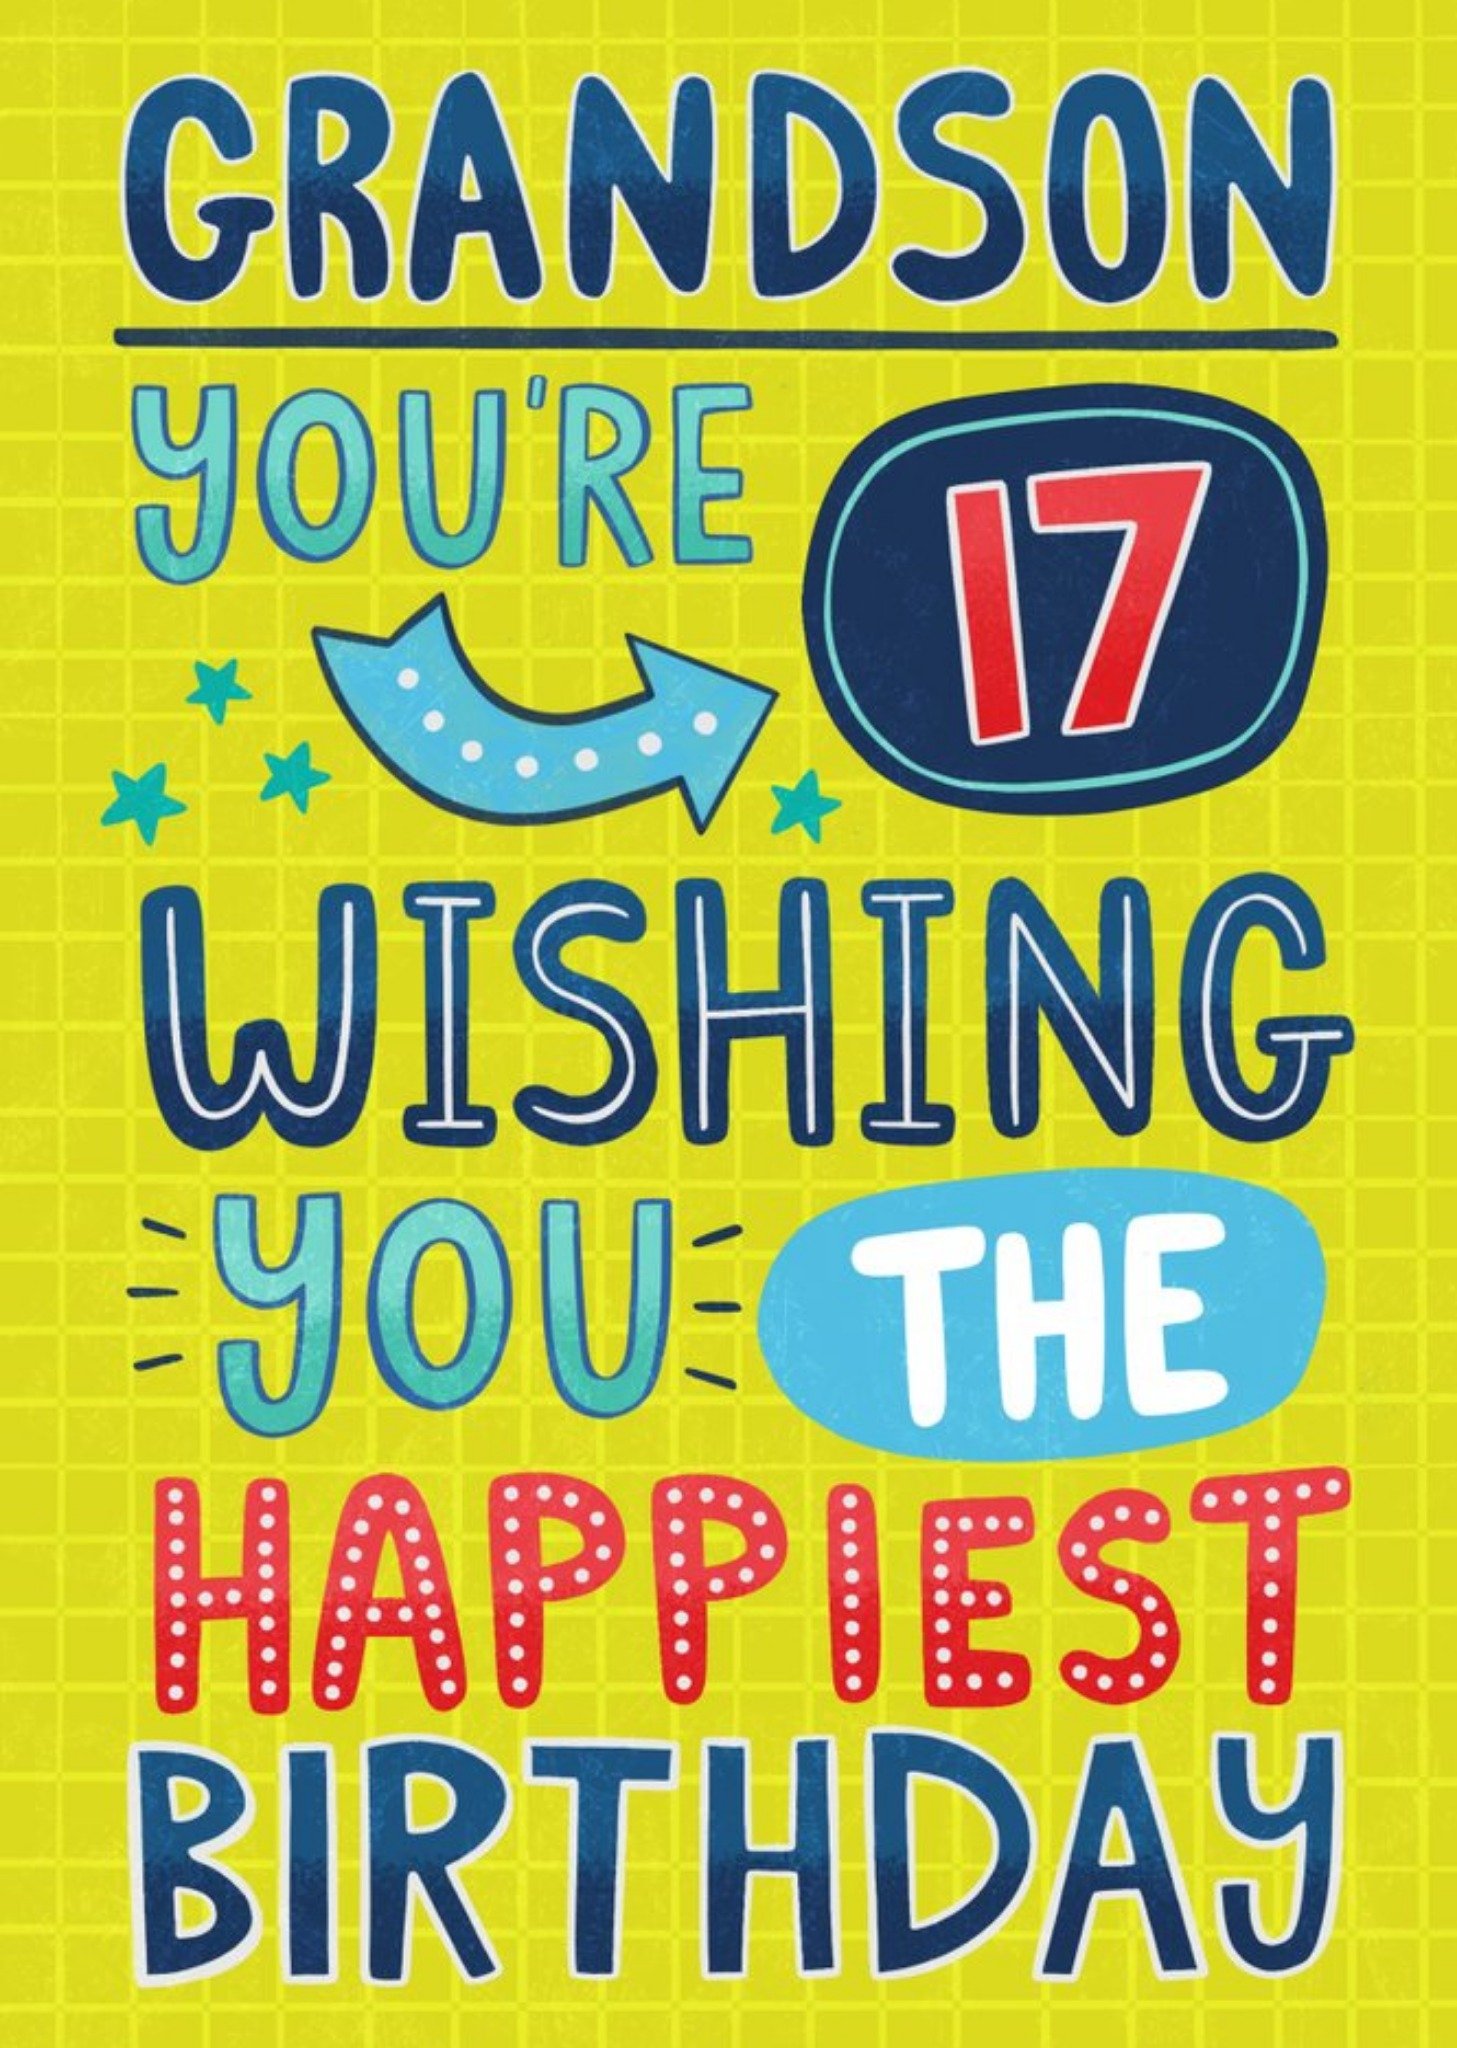 Moonpig Typographic Grandson You're 17 Wishing You The Happiest Birthday Card Ecard